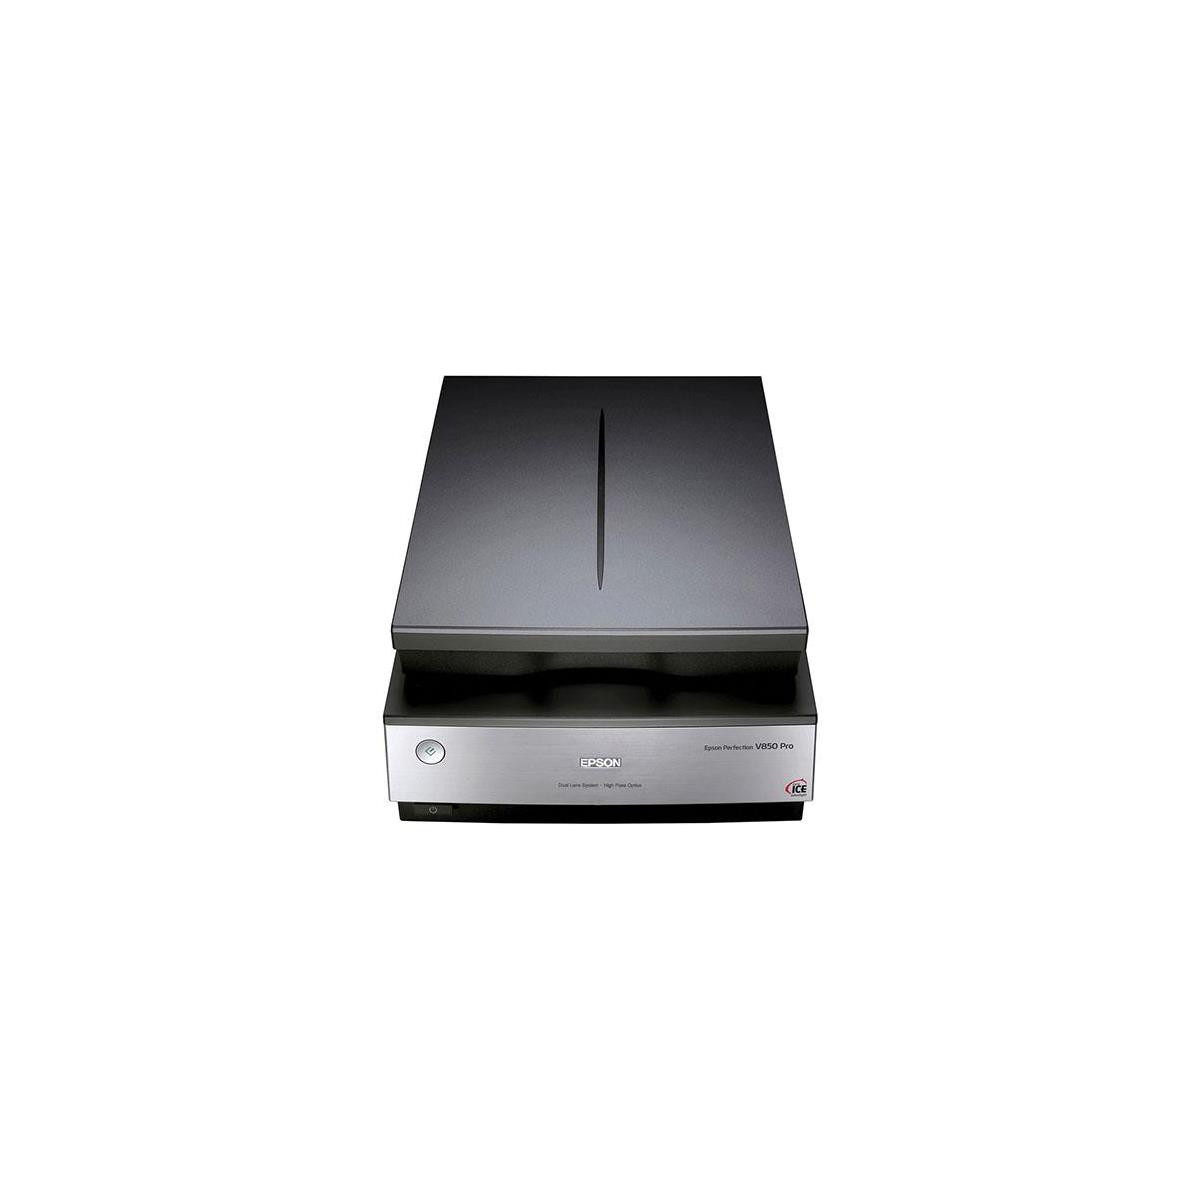 

Epson Perfection V850 Pro Flatbed Photo Scanner - Refurbished by Epson